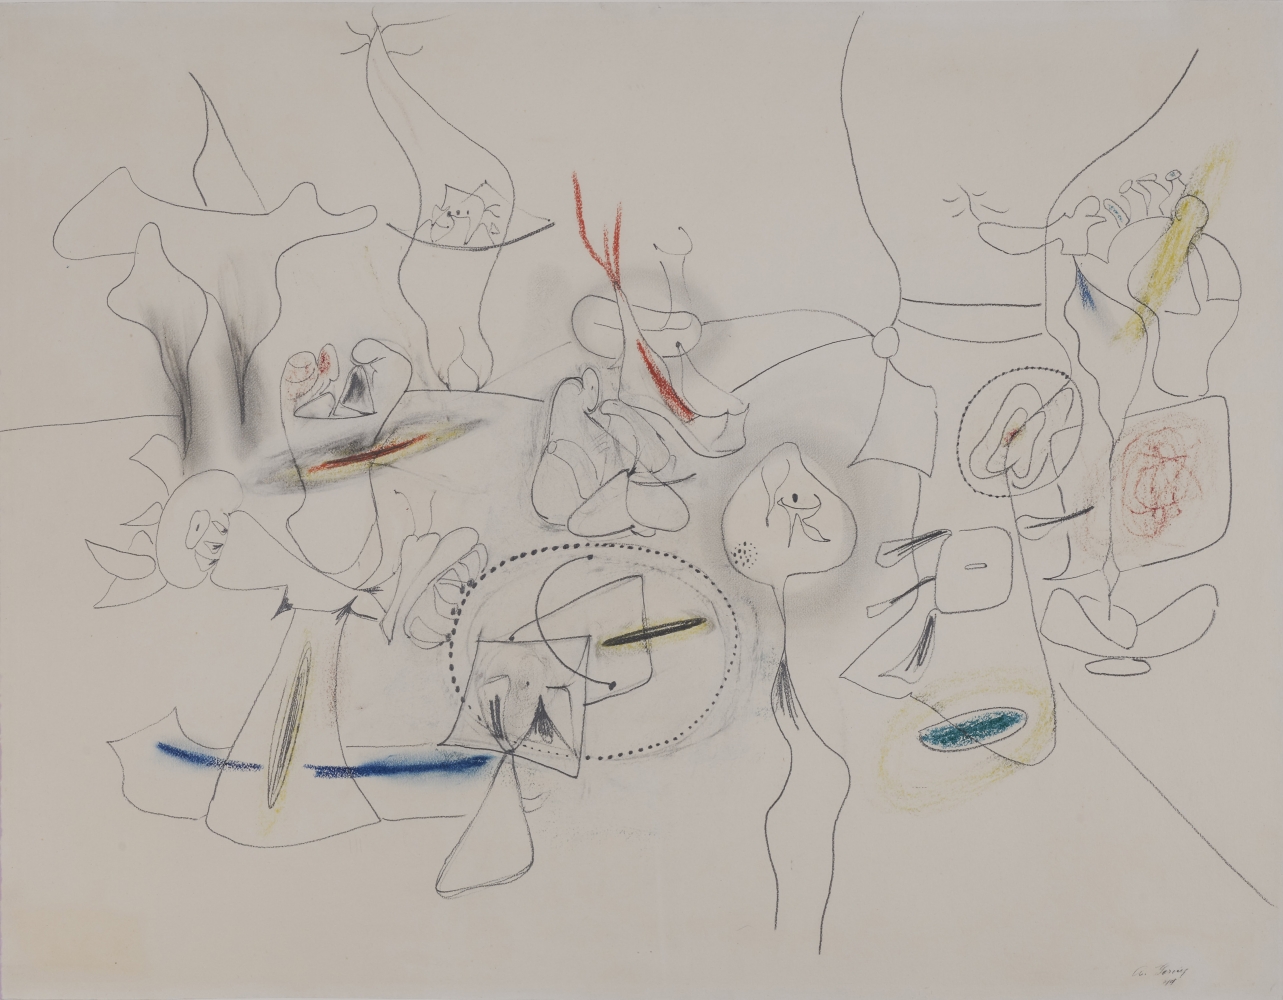 Untitled, 1944, graphite pencil and crayon on lavender-edged paper, 20 x 26 1/4 in. (50.8 x 66.7 cm). Private collection. Photo: Jerry L. Thompson. [AGCR: D1061]